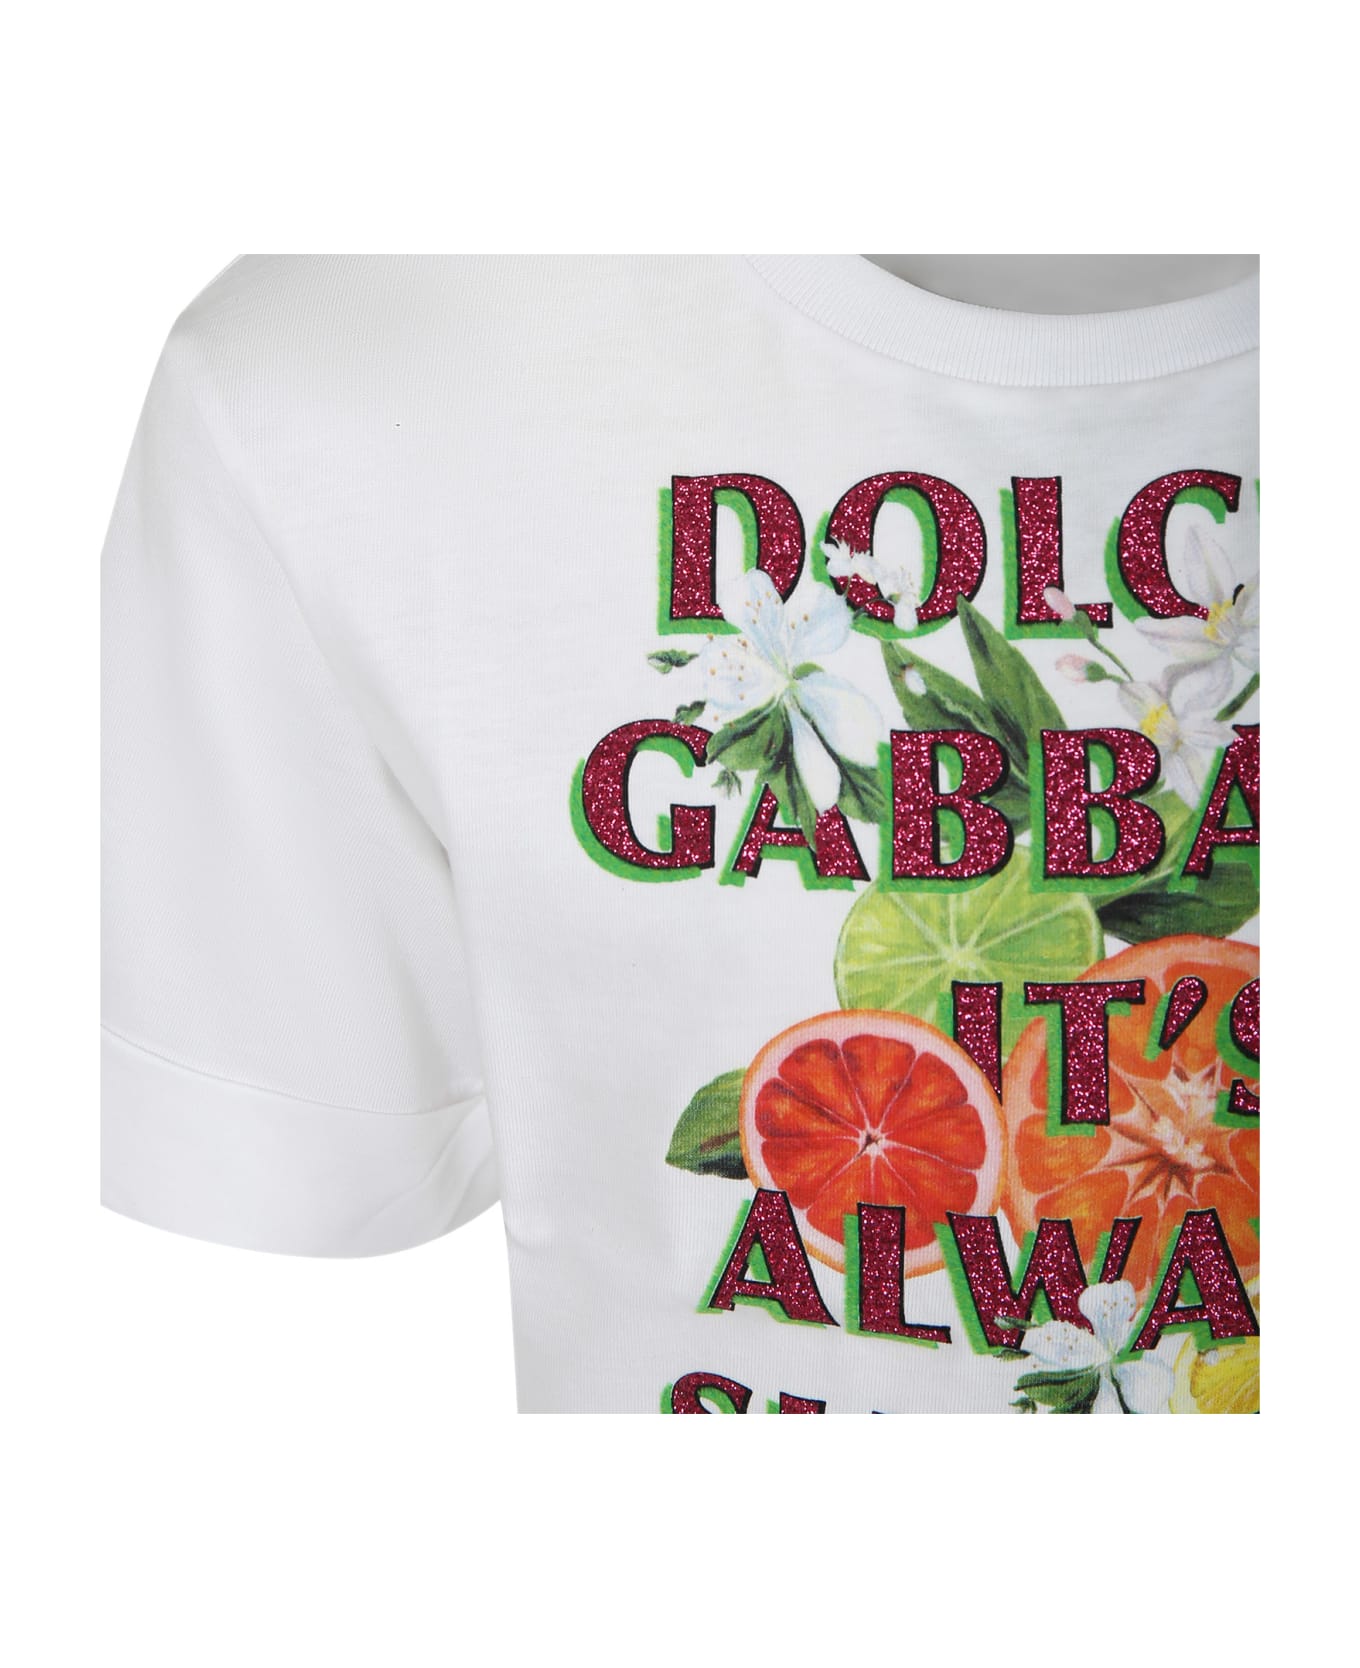 Dolce & Gabbana White T-shirt For Girl With Multicolor Print - White